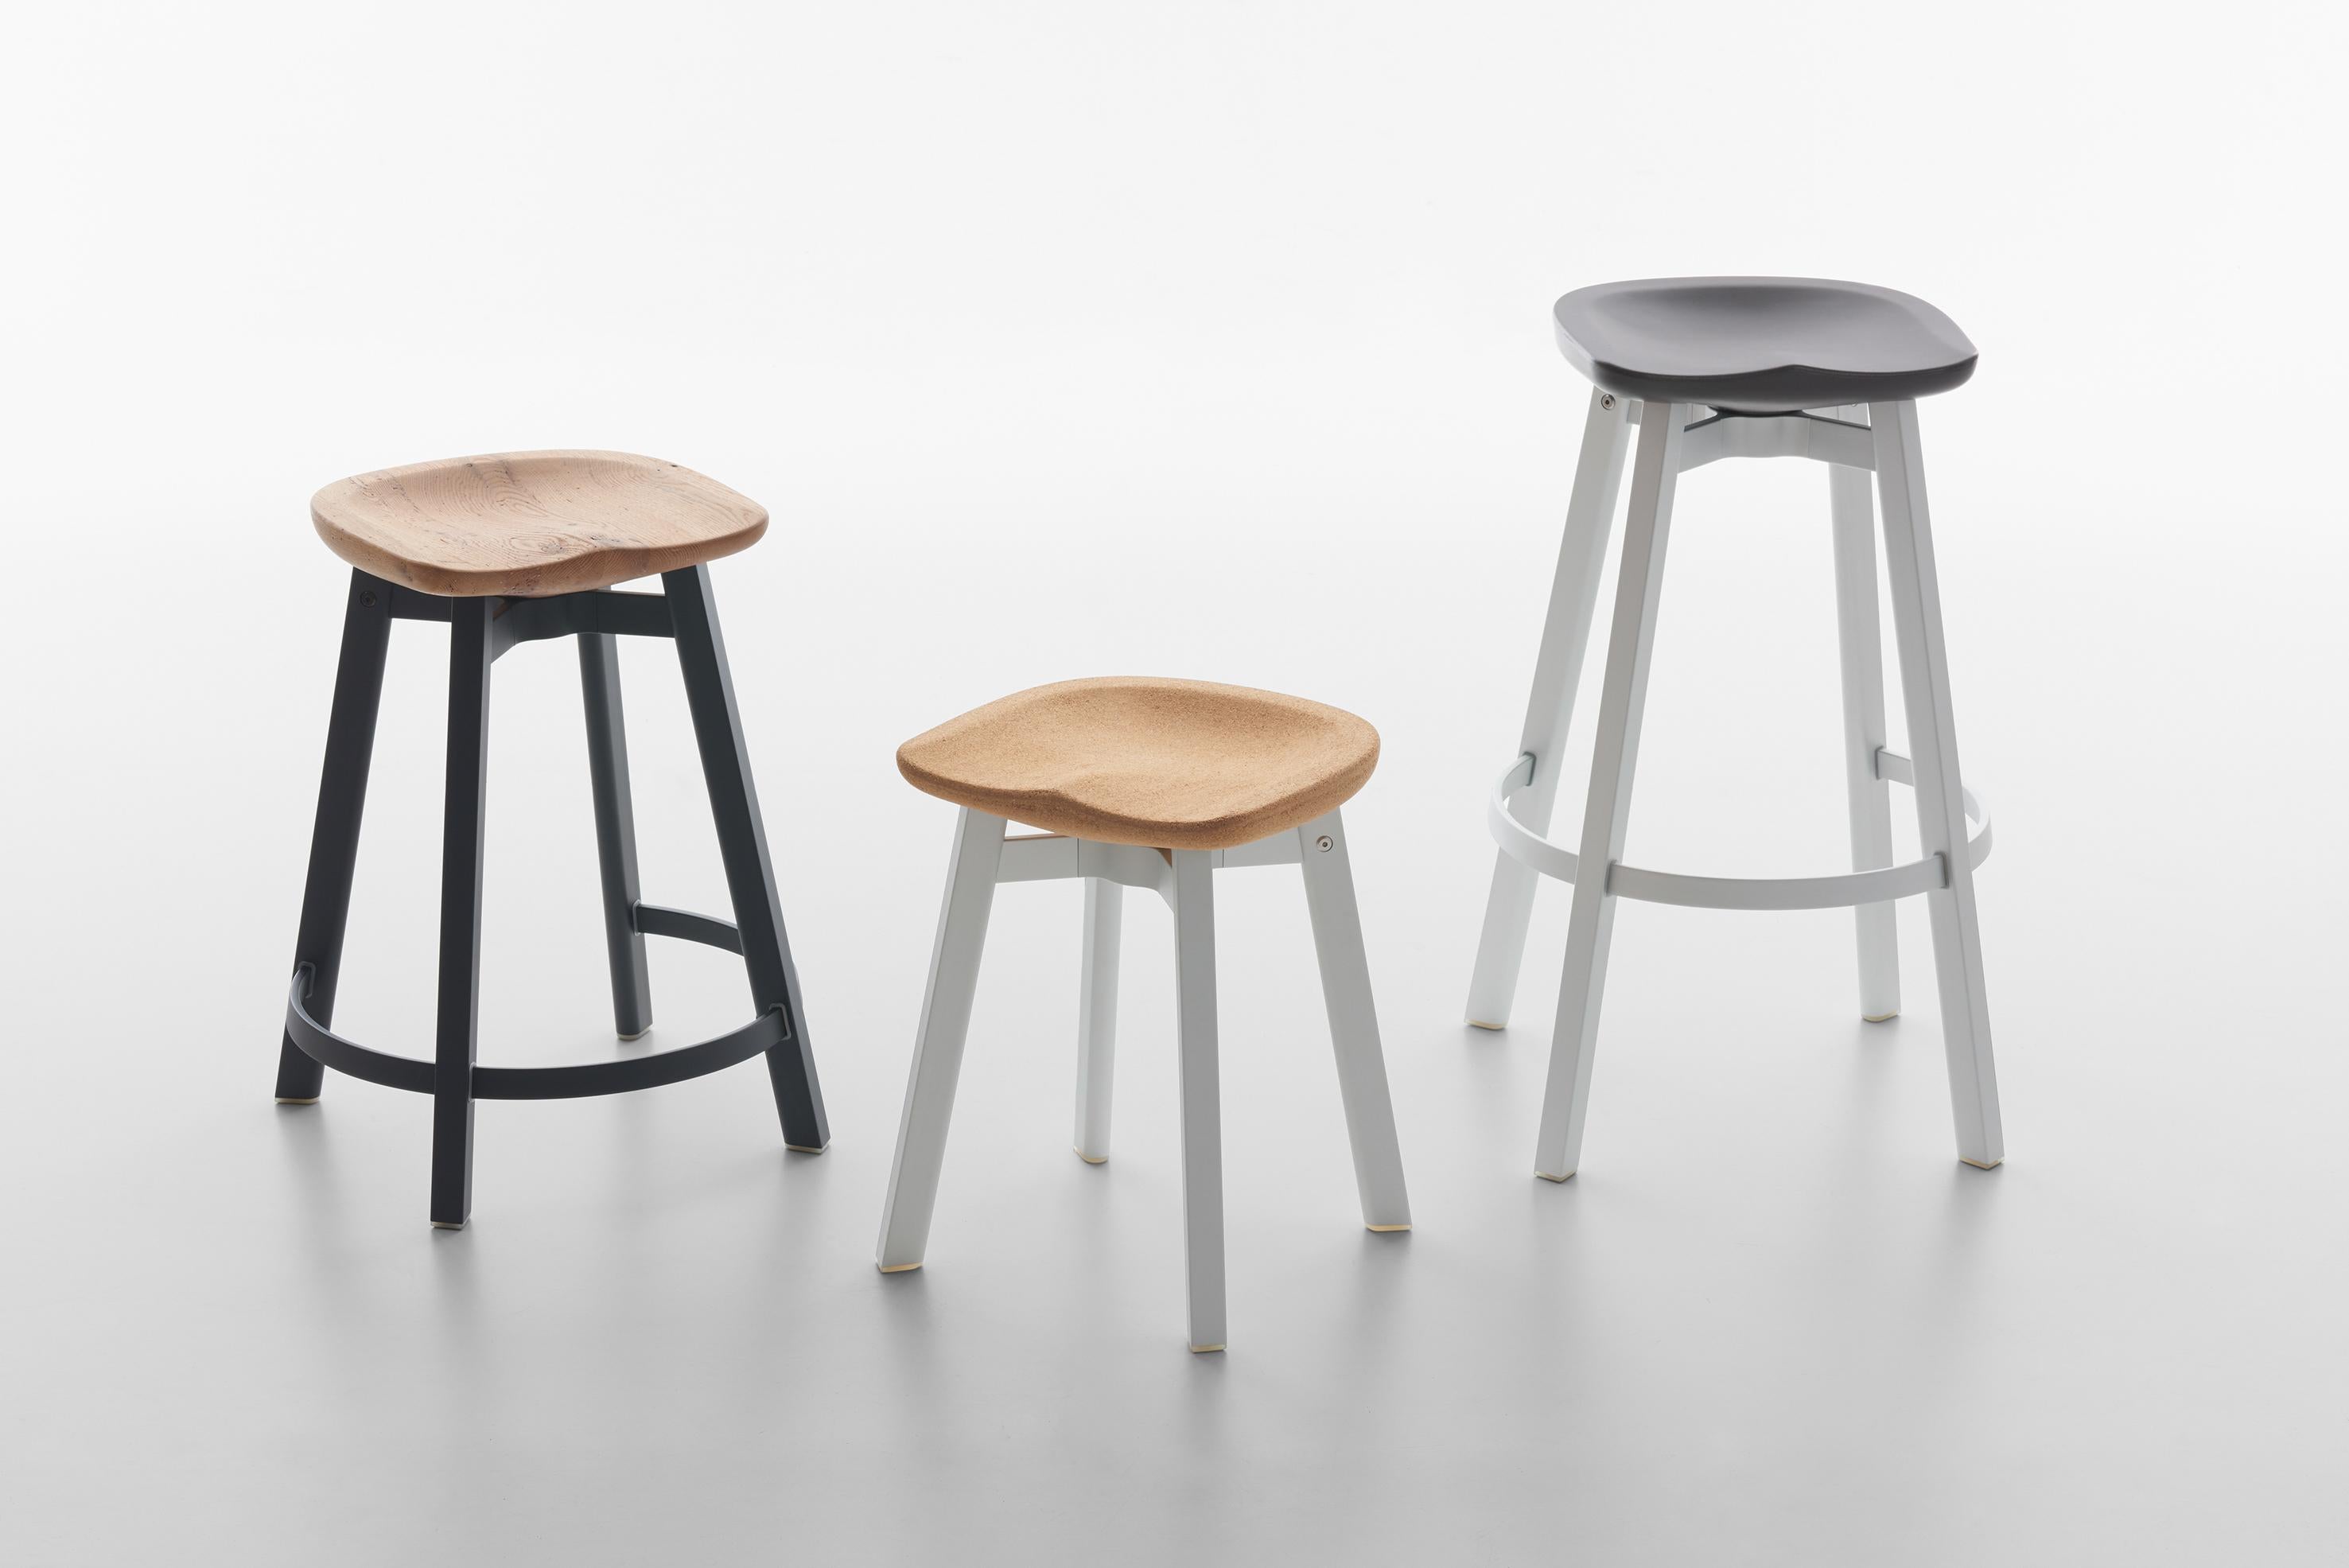 Modern Emeco Su Small Stool in Natural Aluminum with Red Seat by Nendo